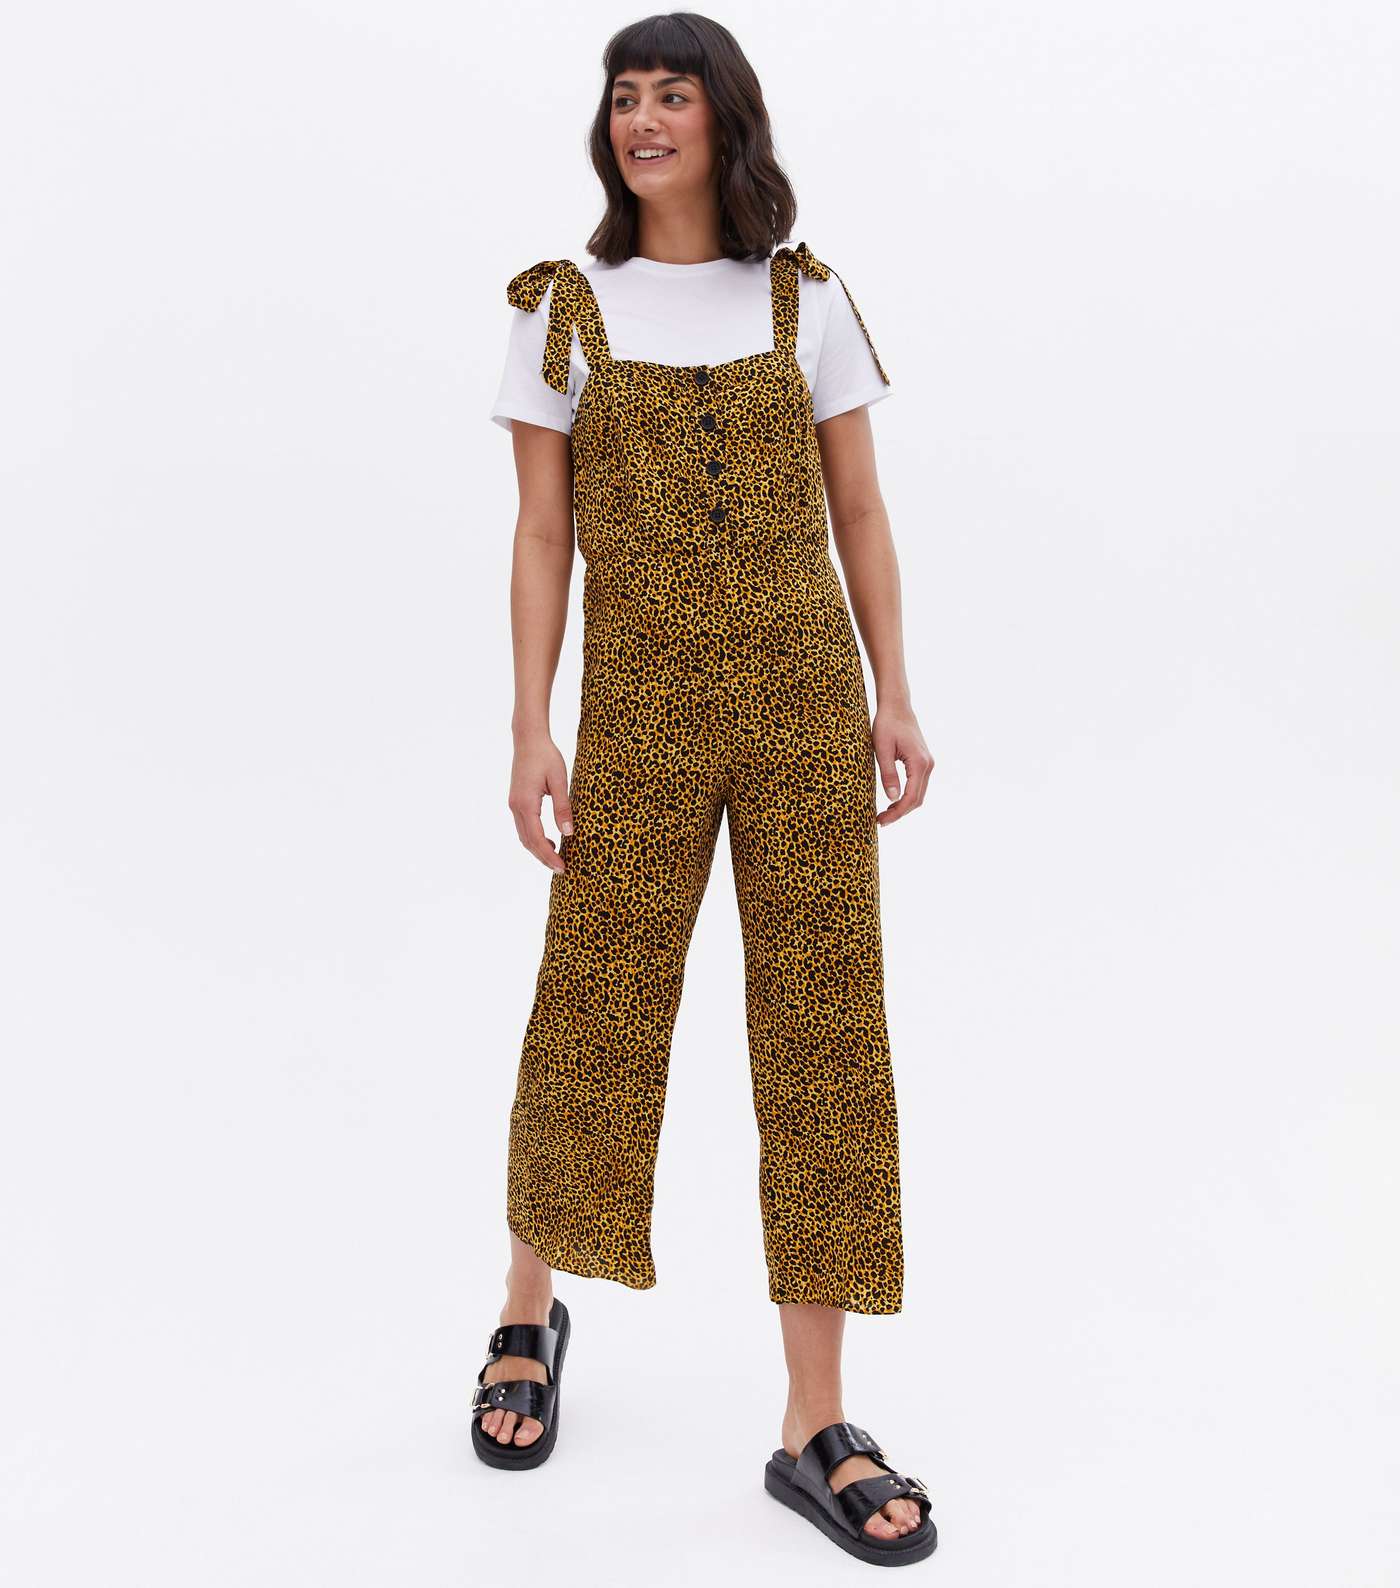 Yellow Animal Print Button Front Wide Leg Crop Jumpsuit